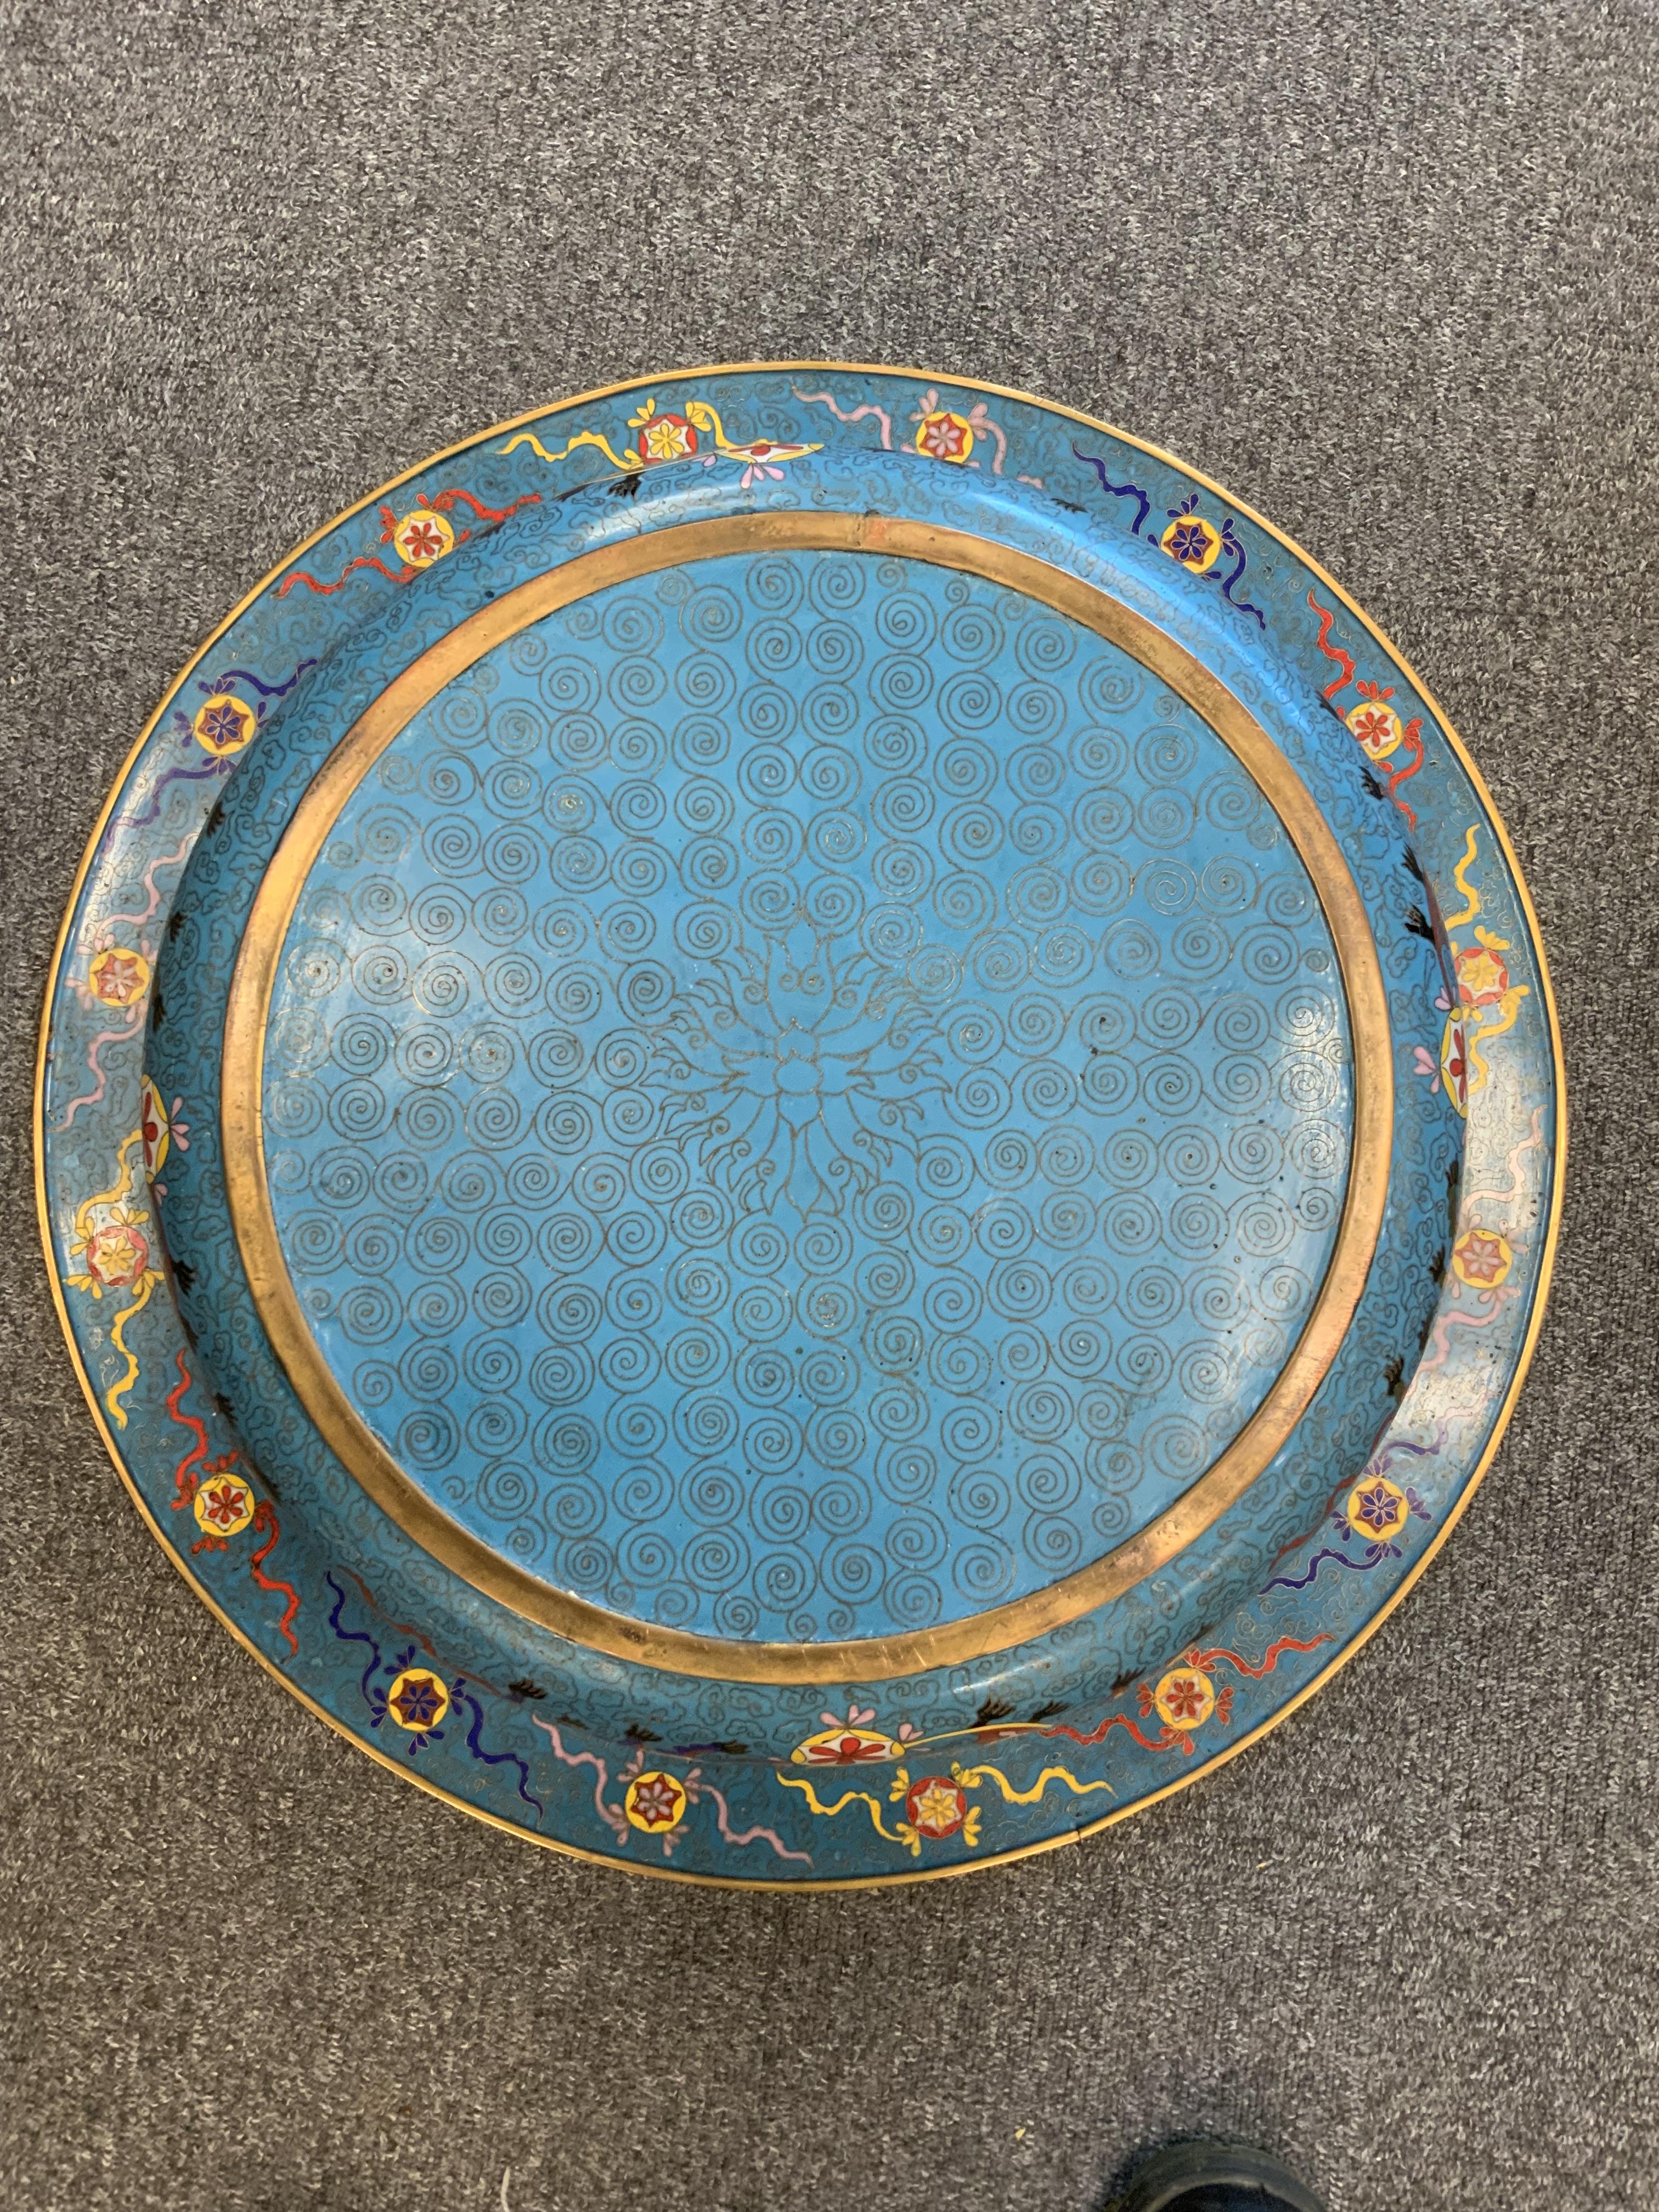 CHINESE CLOISONNE DISH - Image 3 of 5